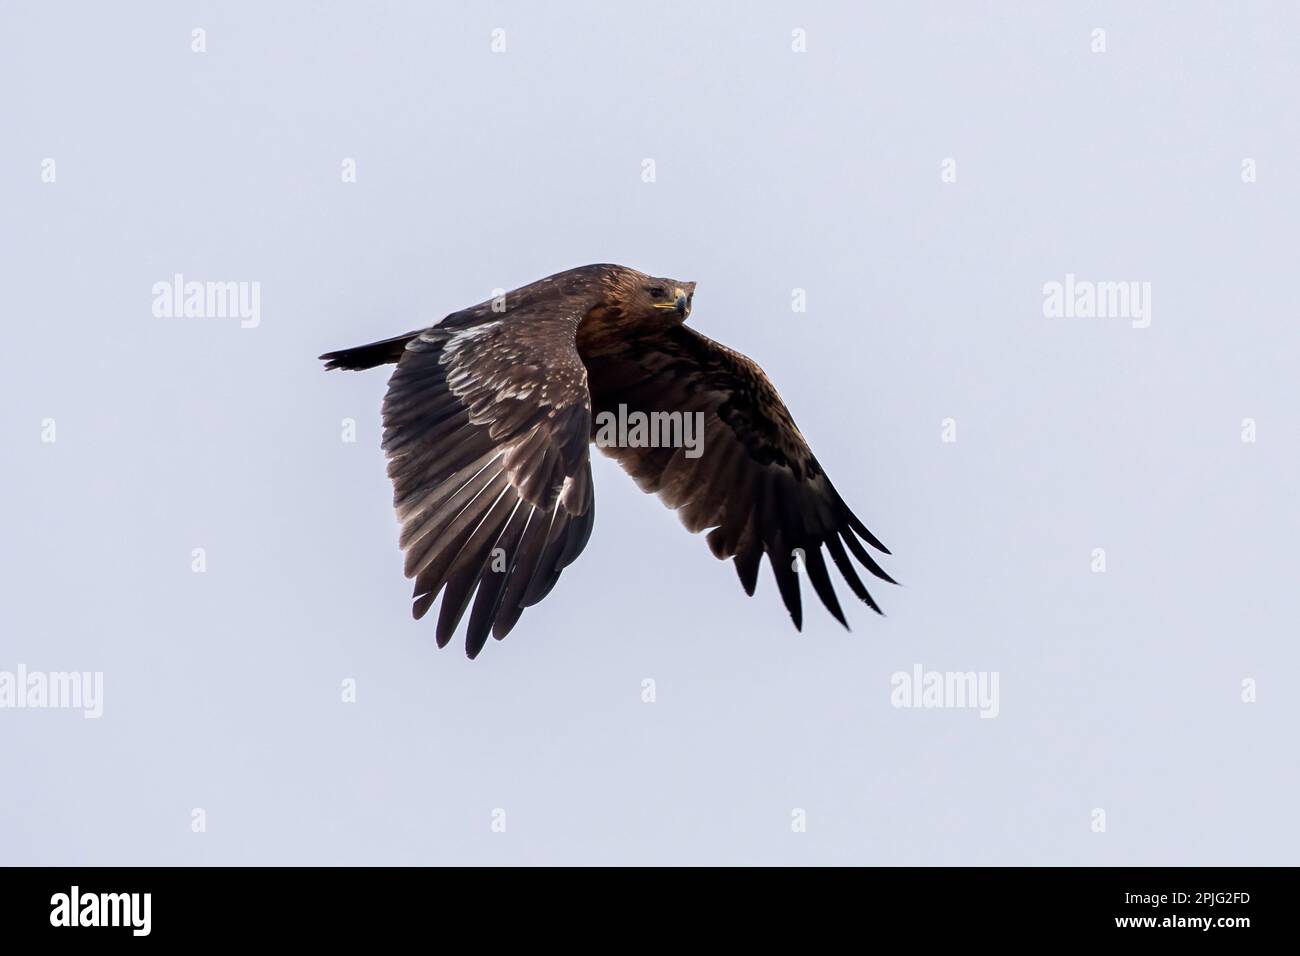 Greater spotted eagle (Clanga clanga), also called the spotted eagle observed near Nalsarovar in Gujarat, India Stock Photo